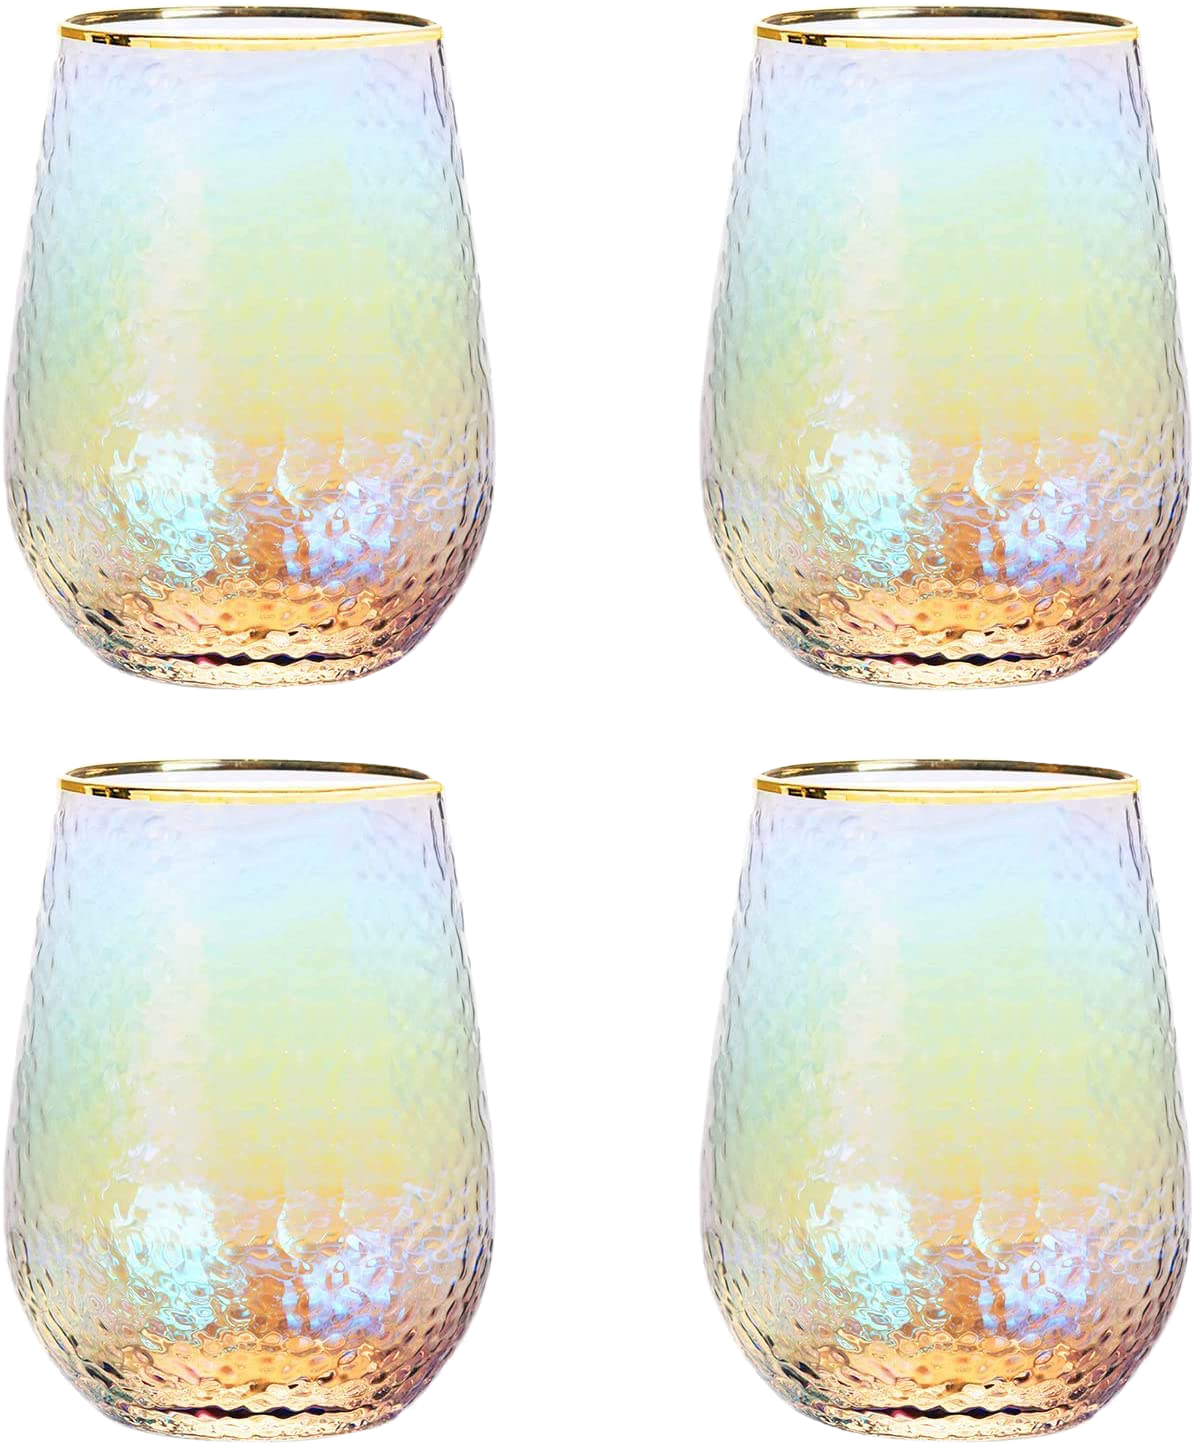 Festive Lustered Iridescent Stemless Wine & Water Glasses - Set of 4-100% Glass 15oz Mouthblown Colorful Glasses - Anniversaries, Birthday Gift, Cocktail Party Radiance - Water, Whiskey, Juice, Gift-2